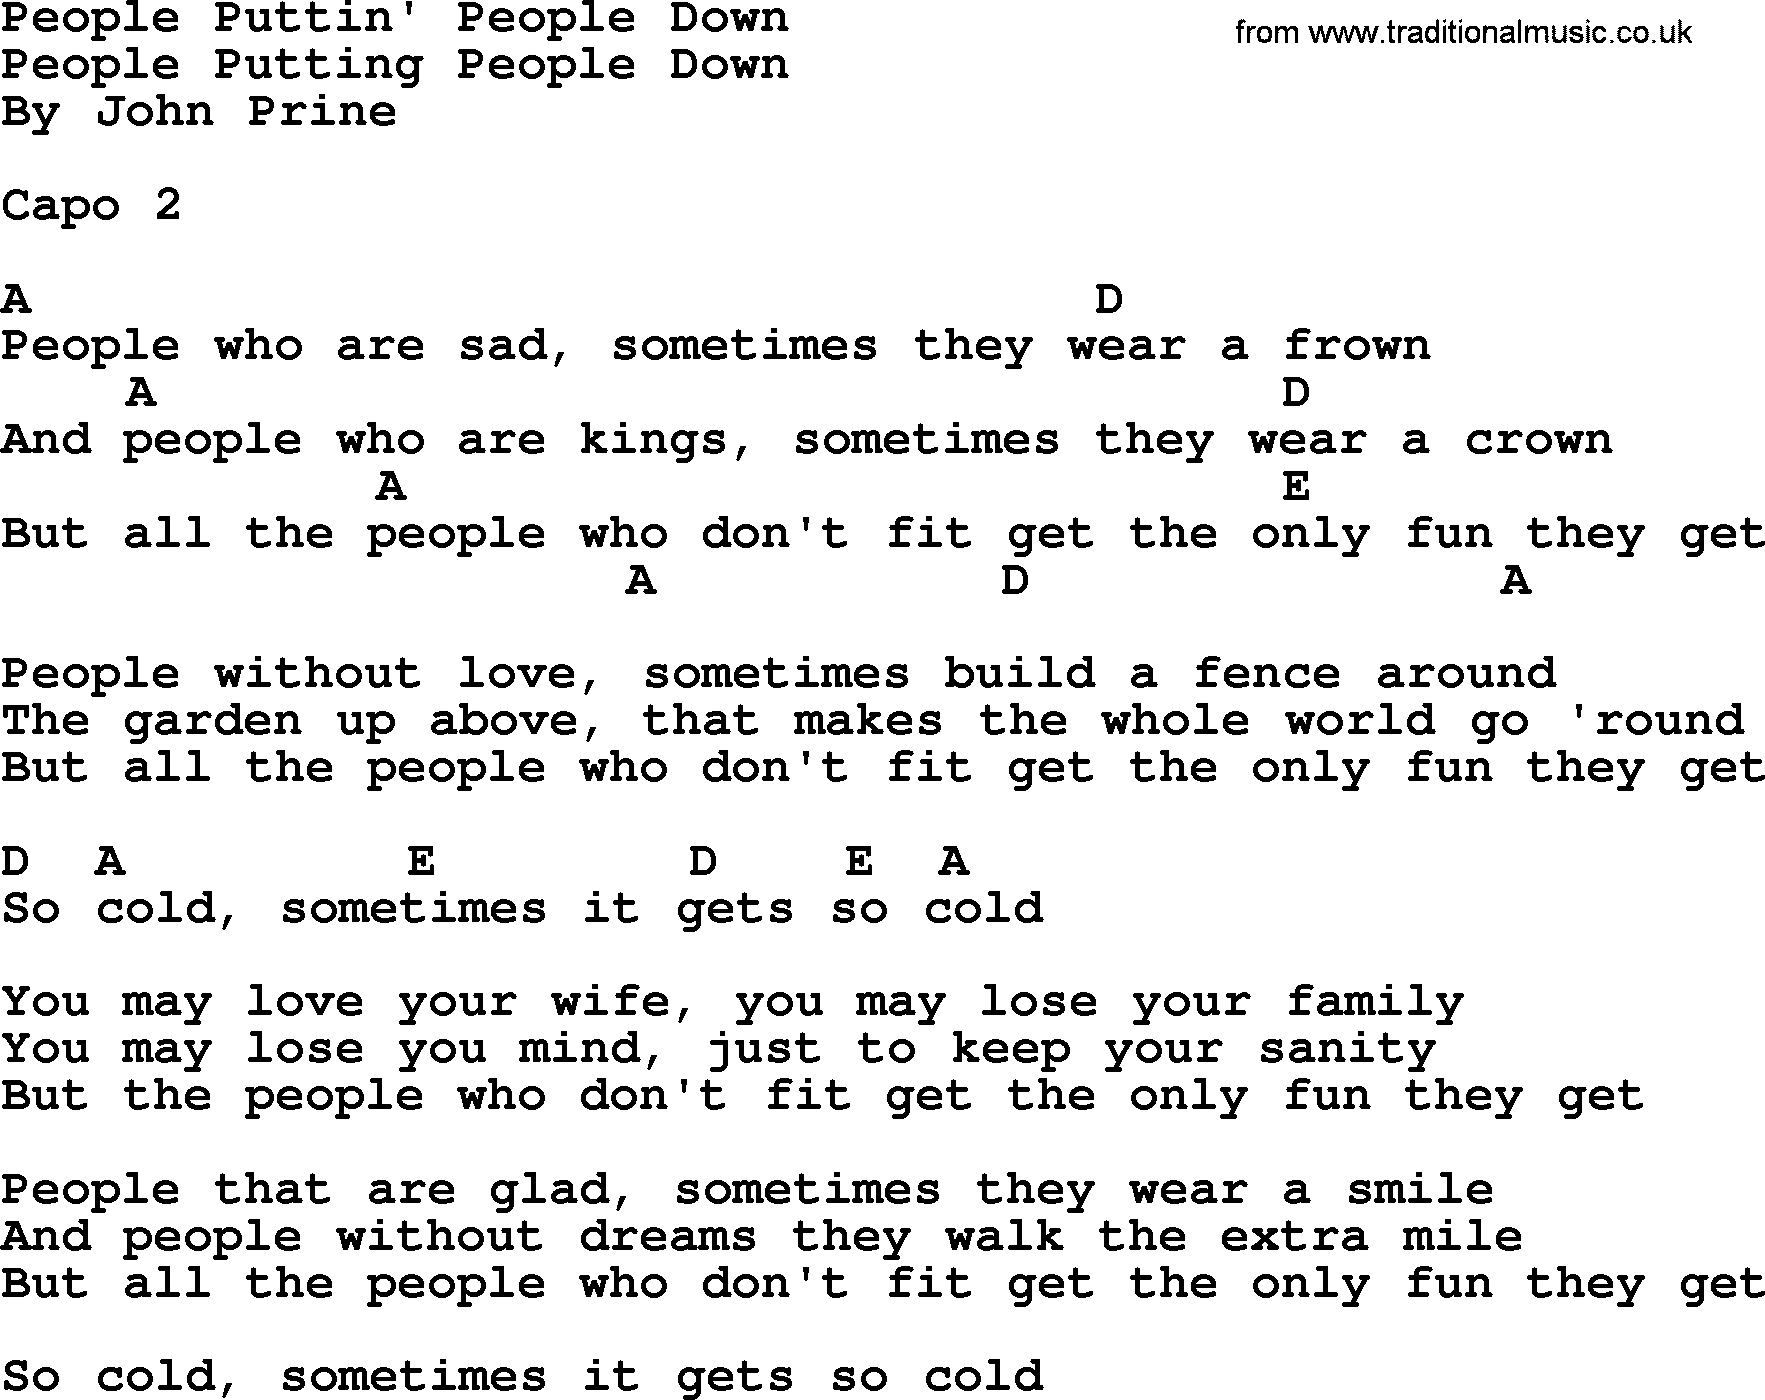 Bluegrass song: People Puttin' People Down, lyrics and chords